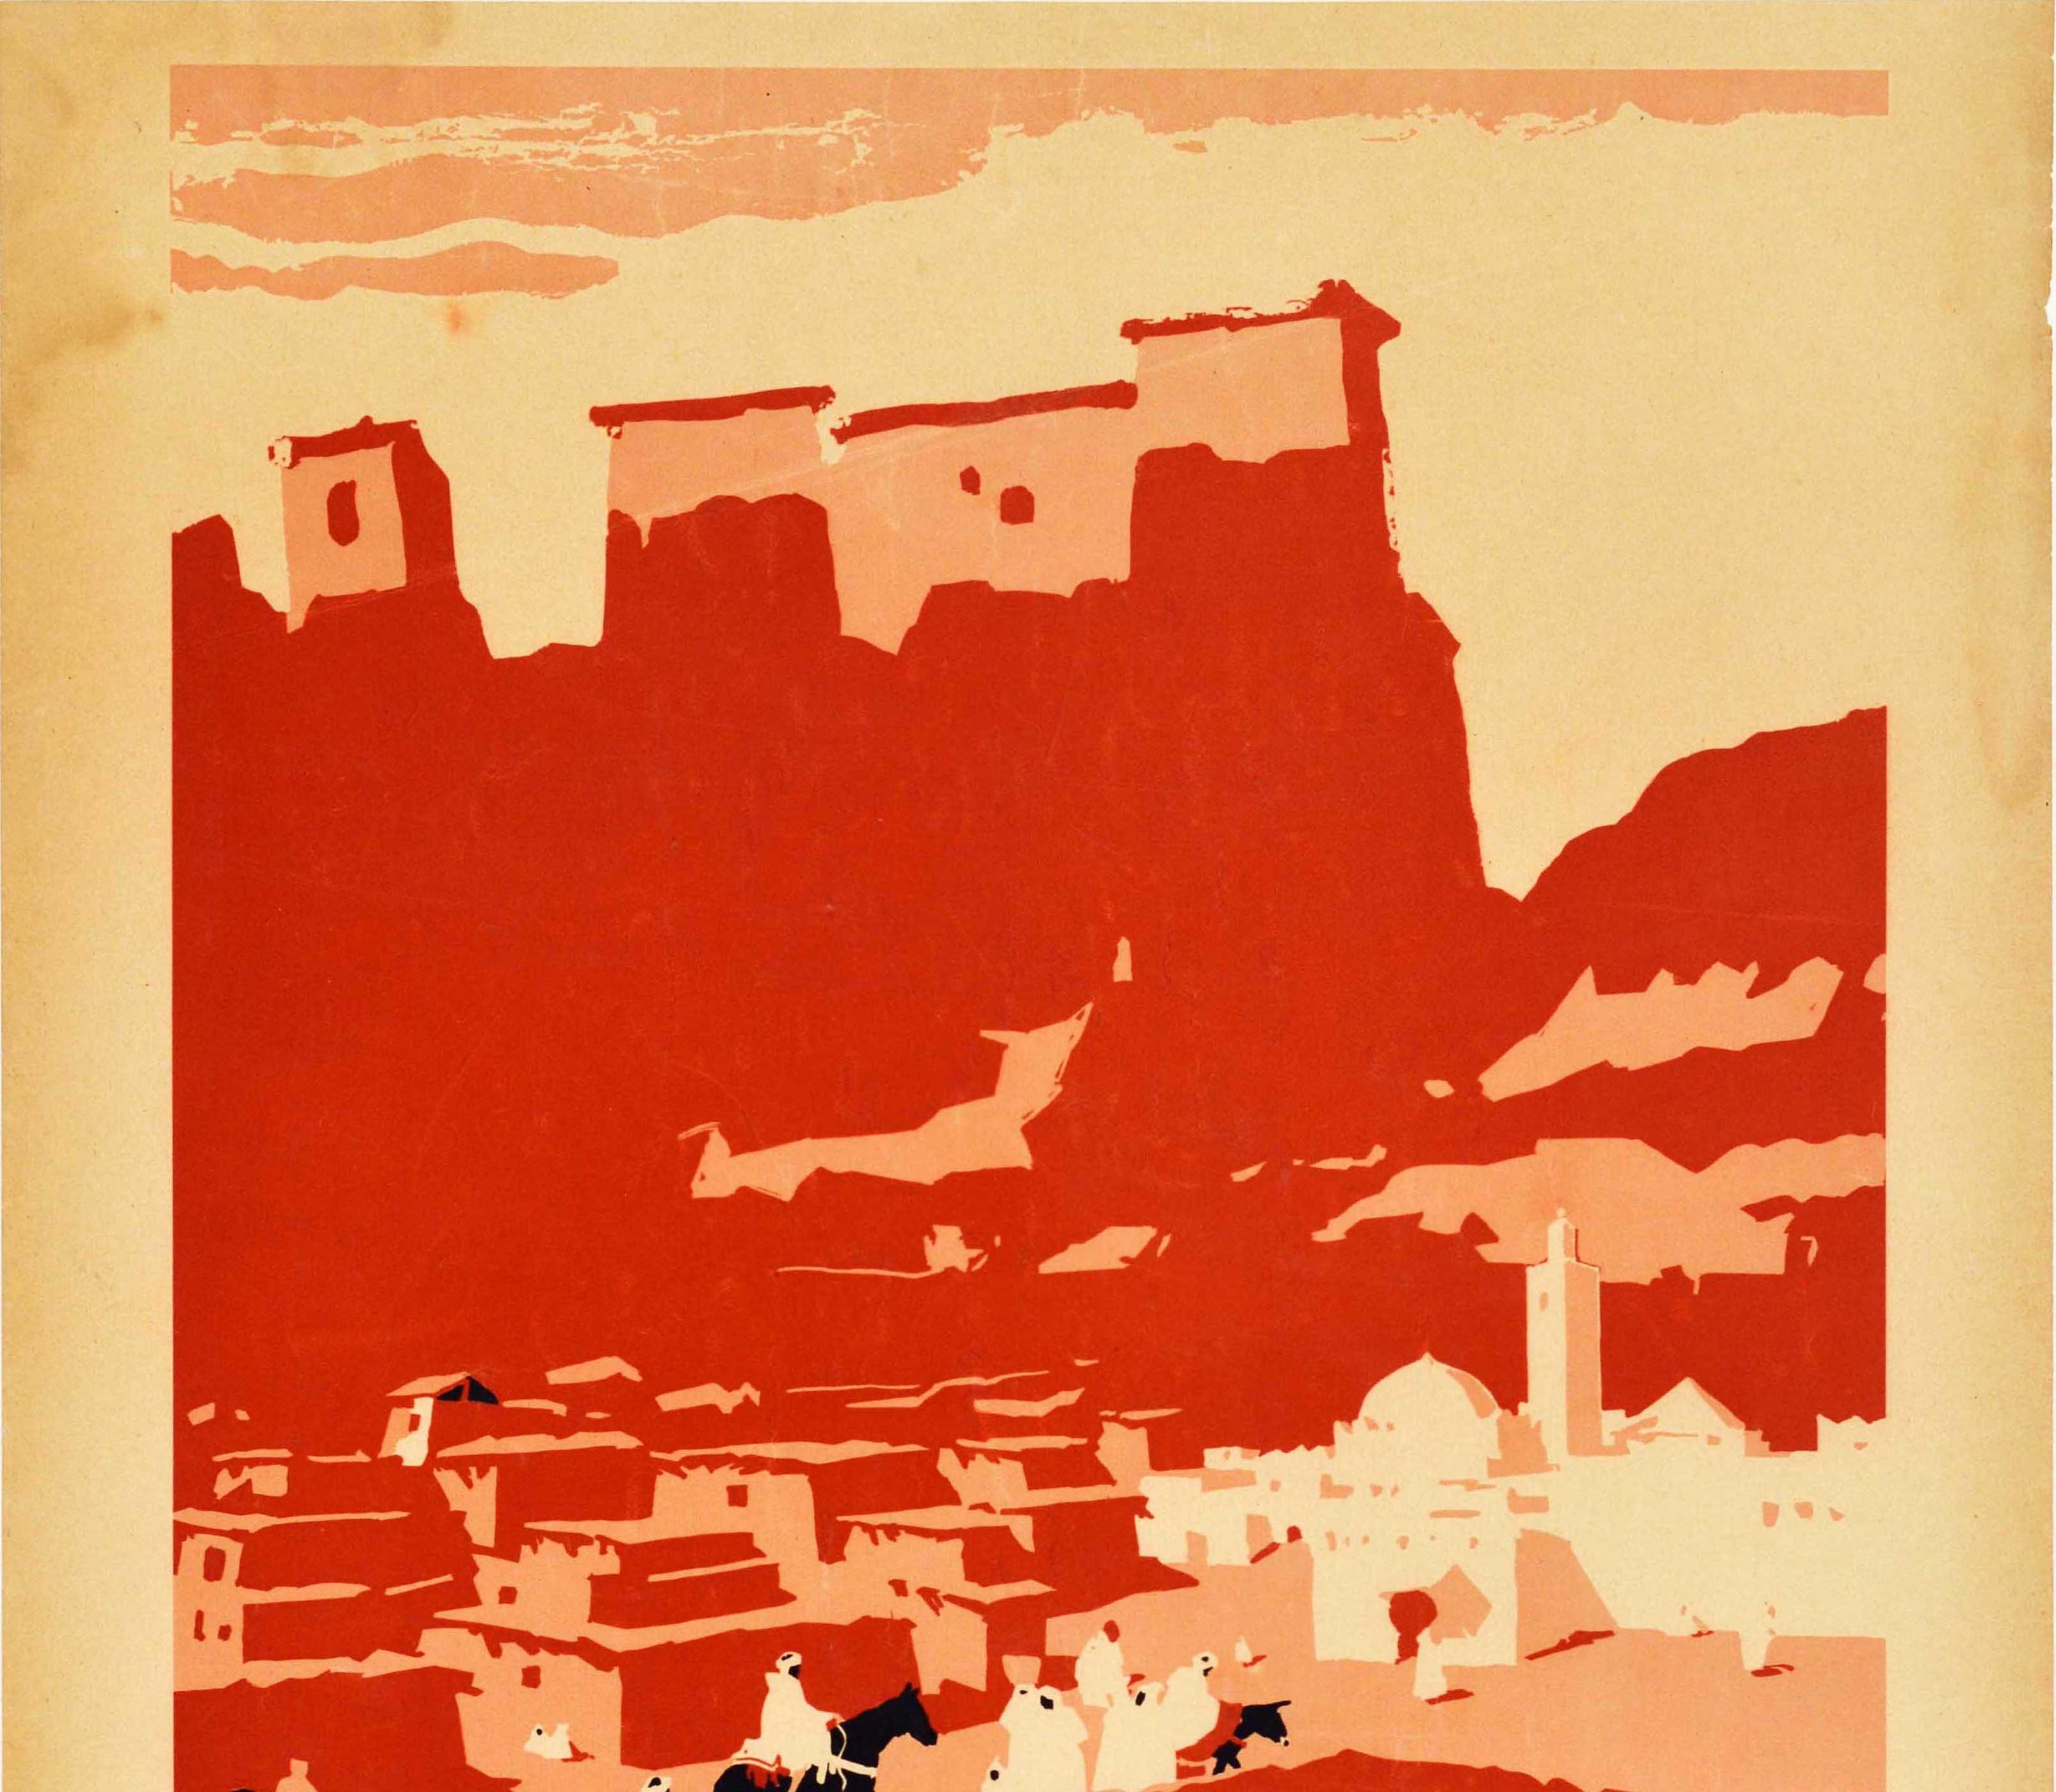 Original vintage travel poster for Morocco Land of Great Tourism / Maroc Terre de Grand Tourisme featuring an illustration by the French painter Robert Genicot (1890-1981) depicting people in black and white clothing walking and riding on a horse